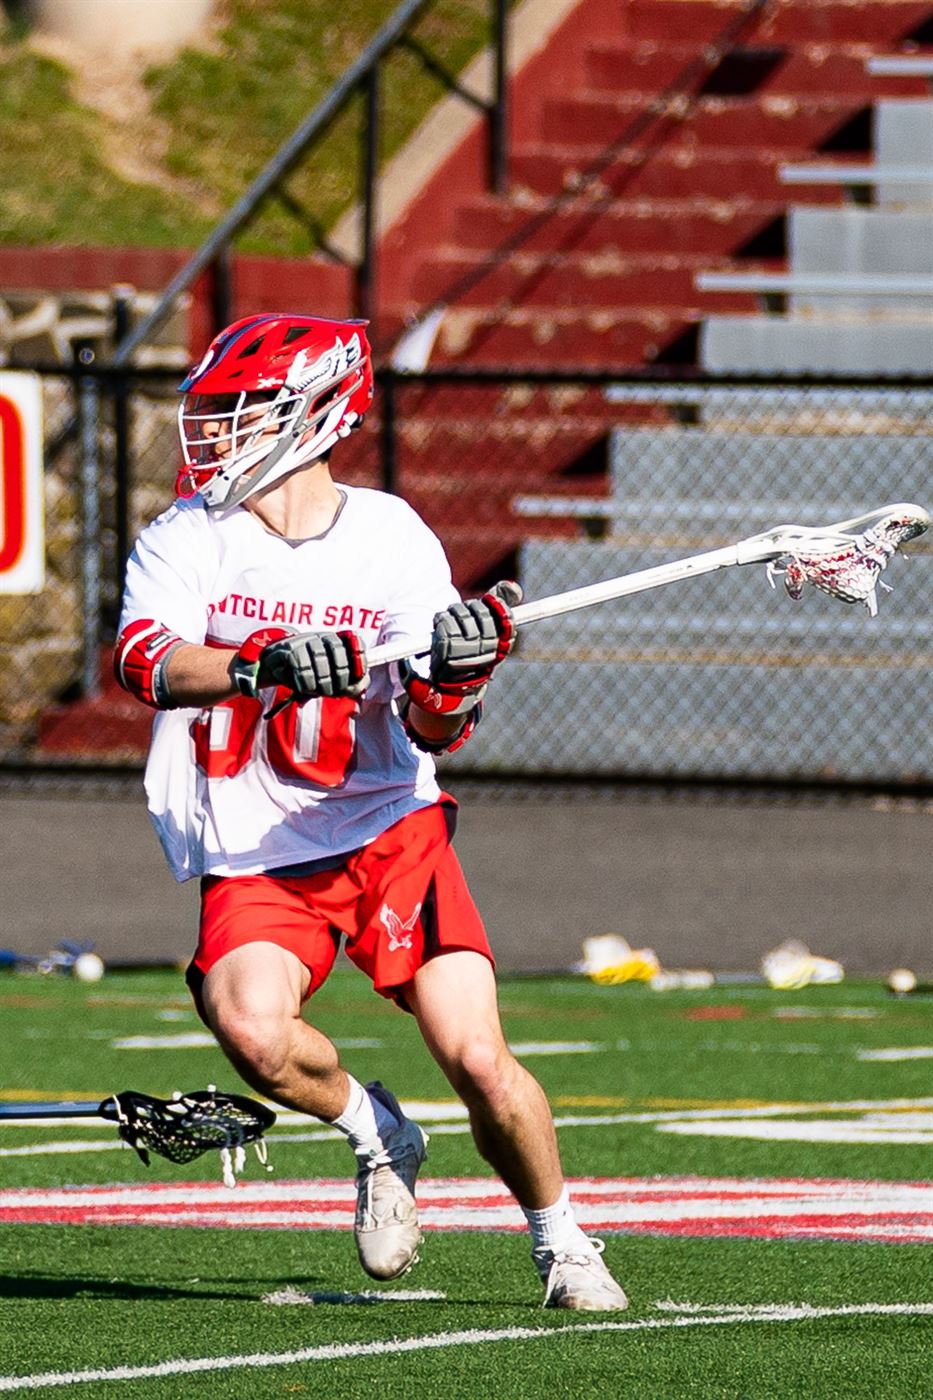 Roper first played lacrosse at the University Of Kent in England. Chris Krusberg | The Montclarion